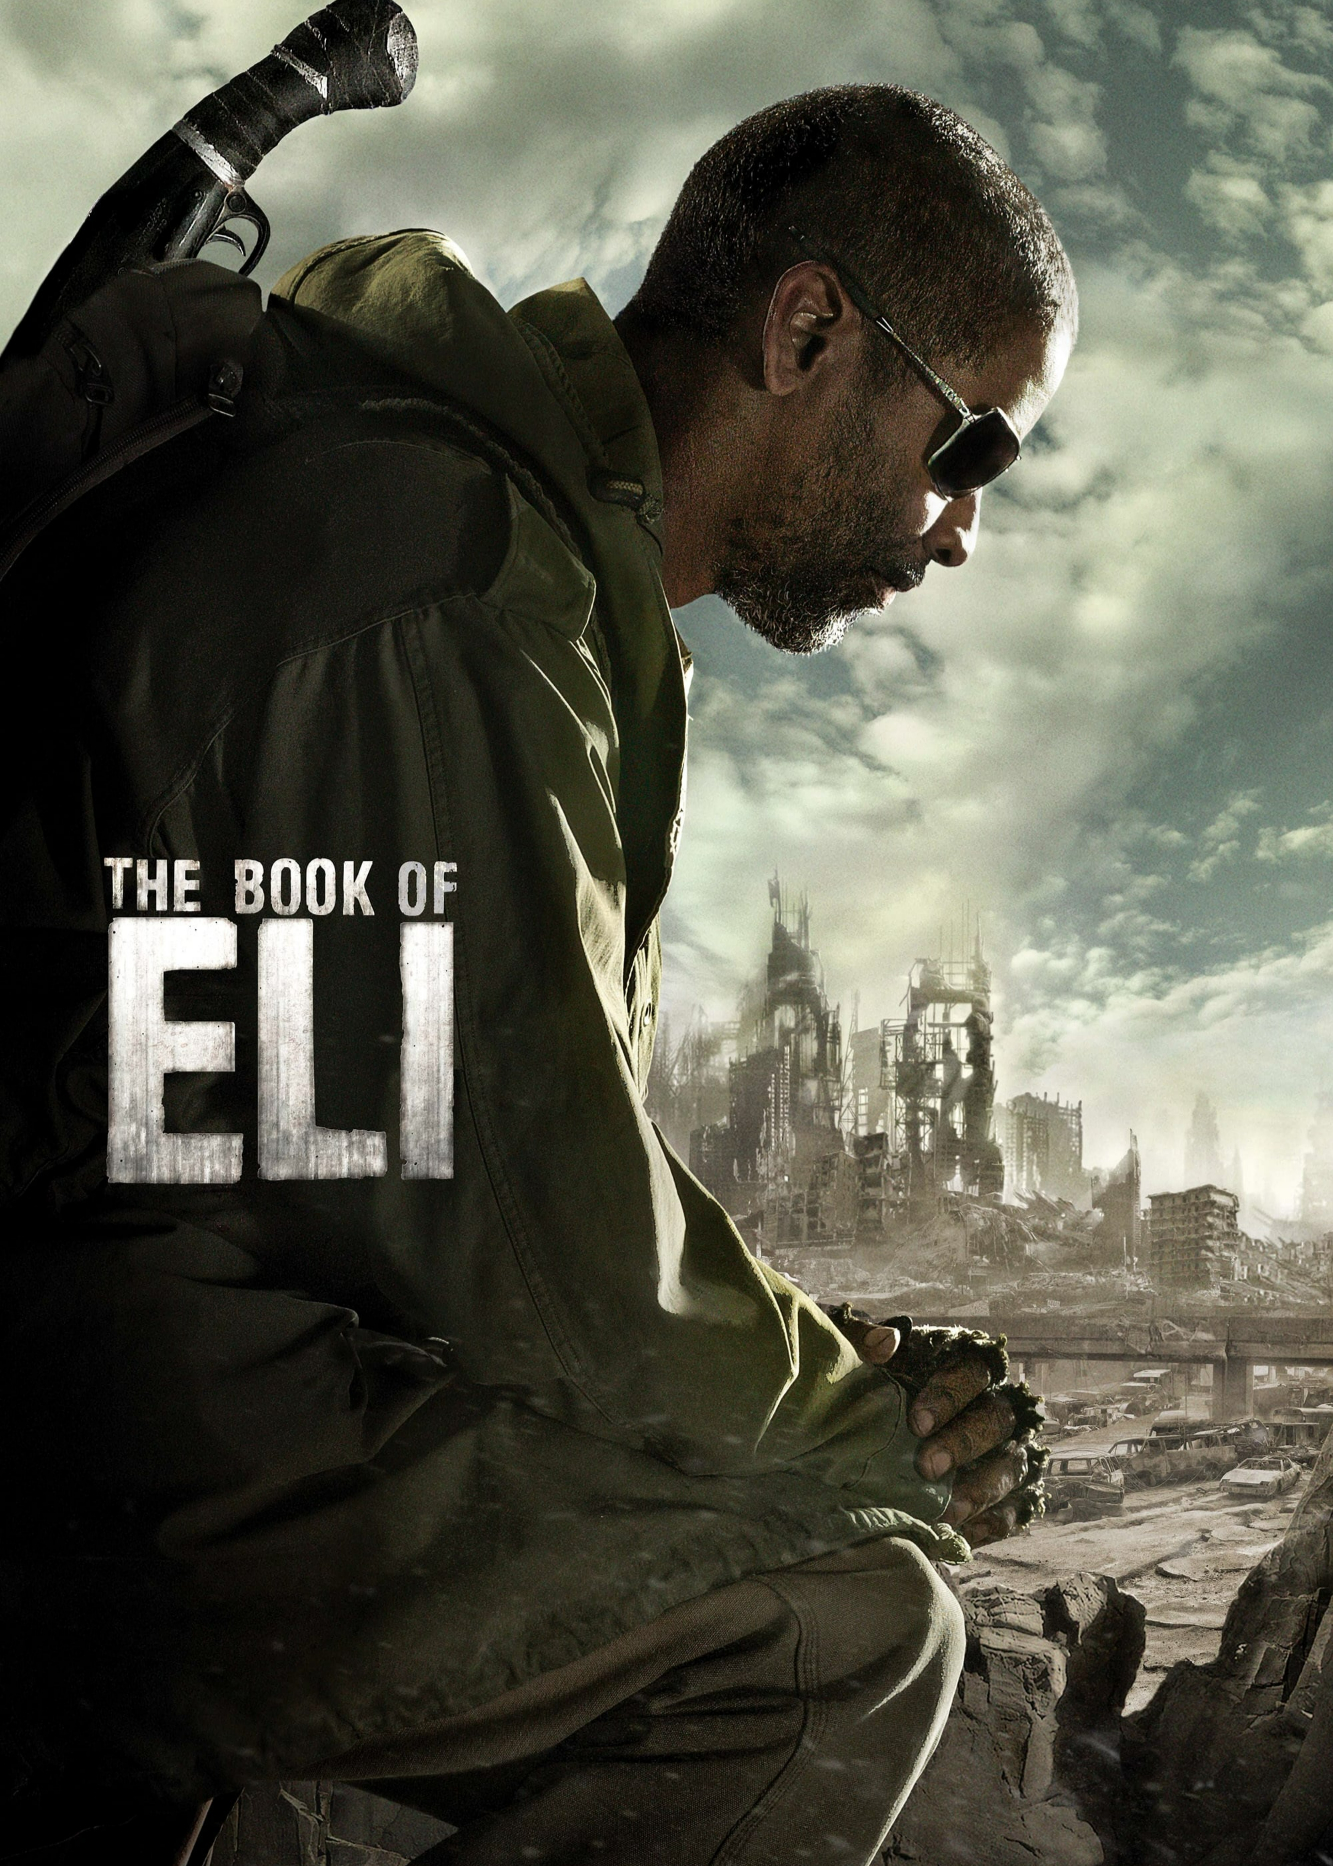 Poster Phim The Book of Eli (The Book of Eli)